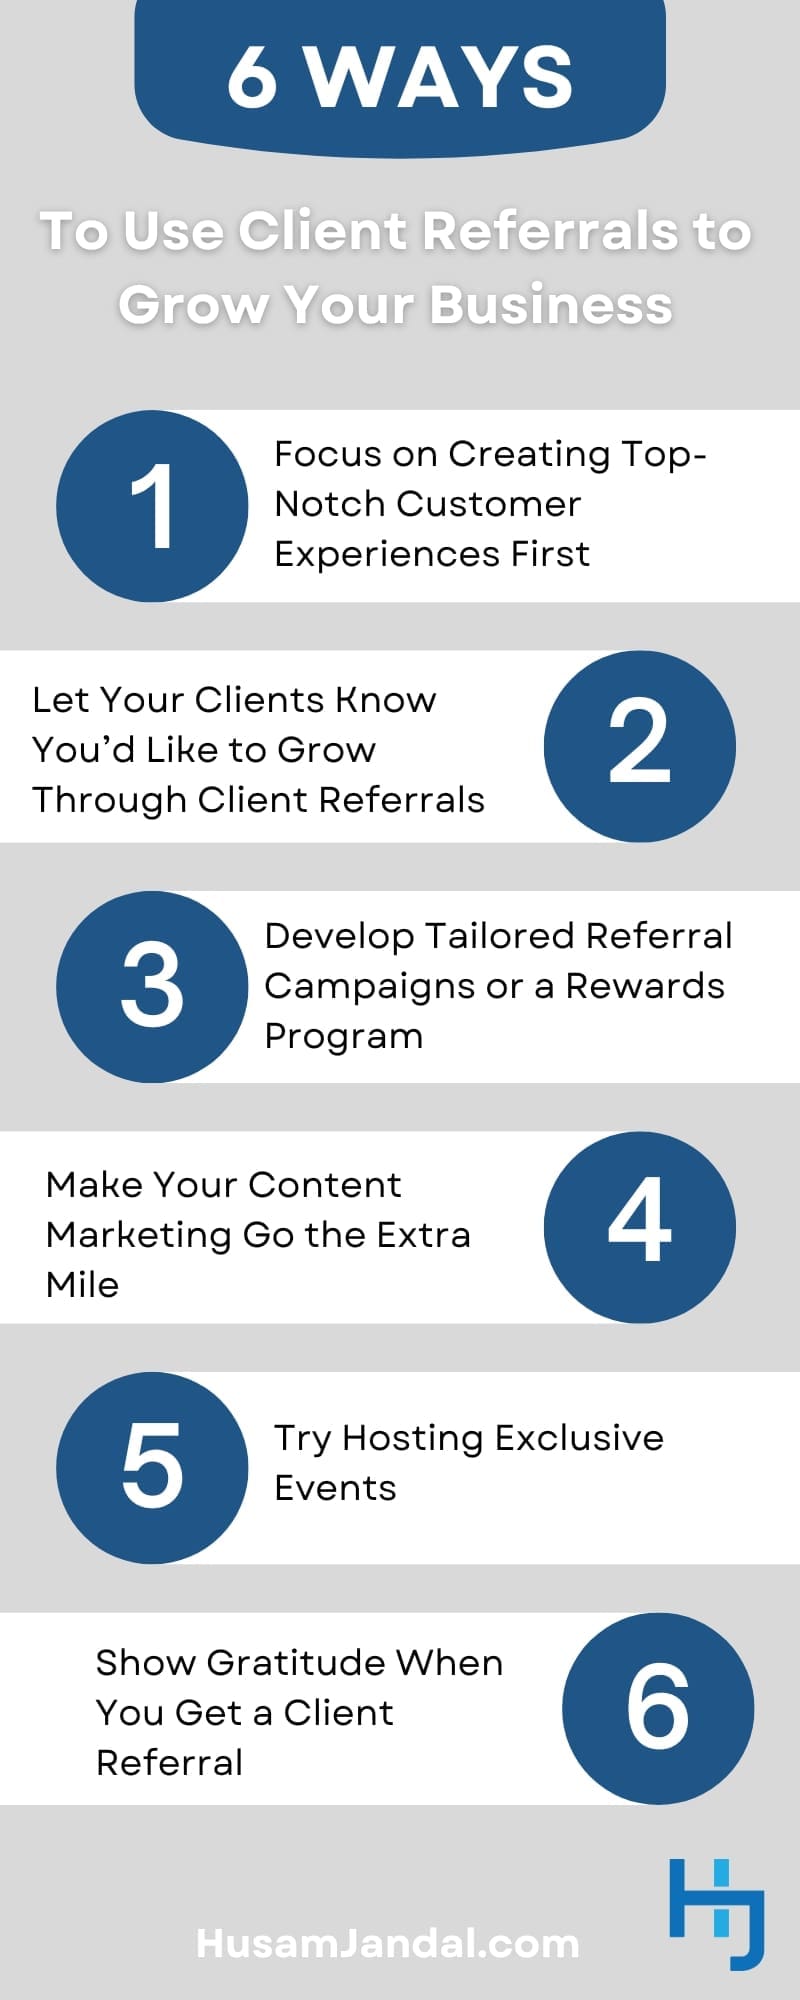 To Use Client Referrals to Grow Your Business